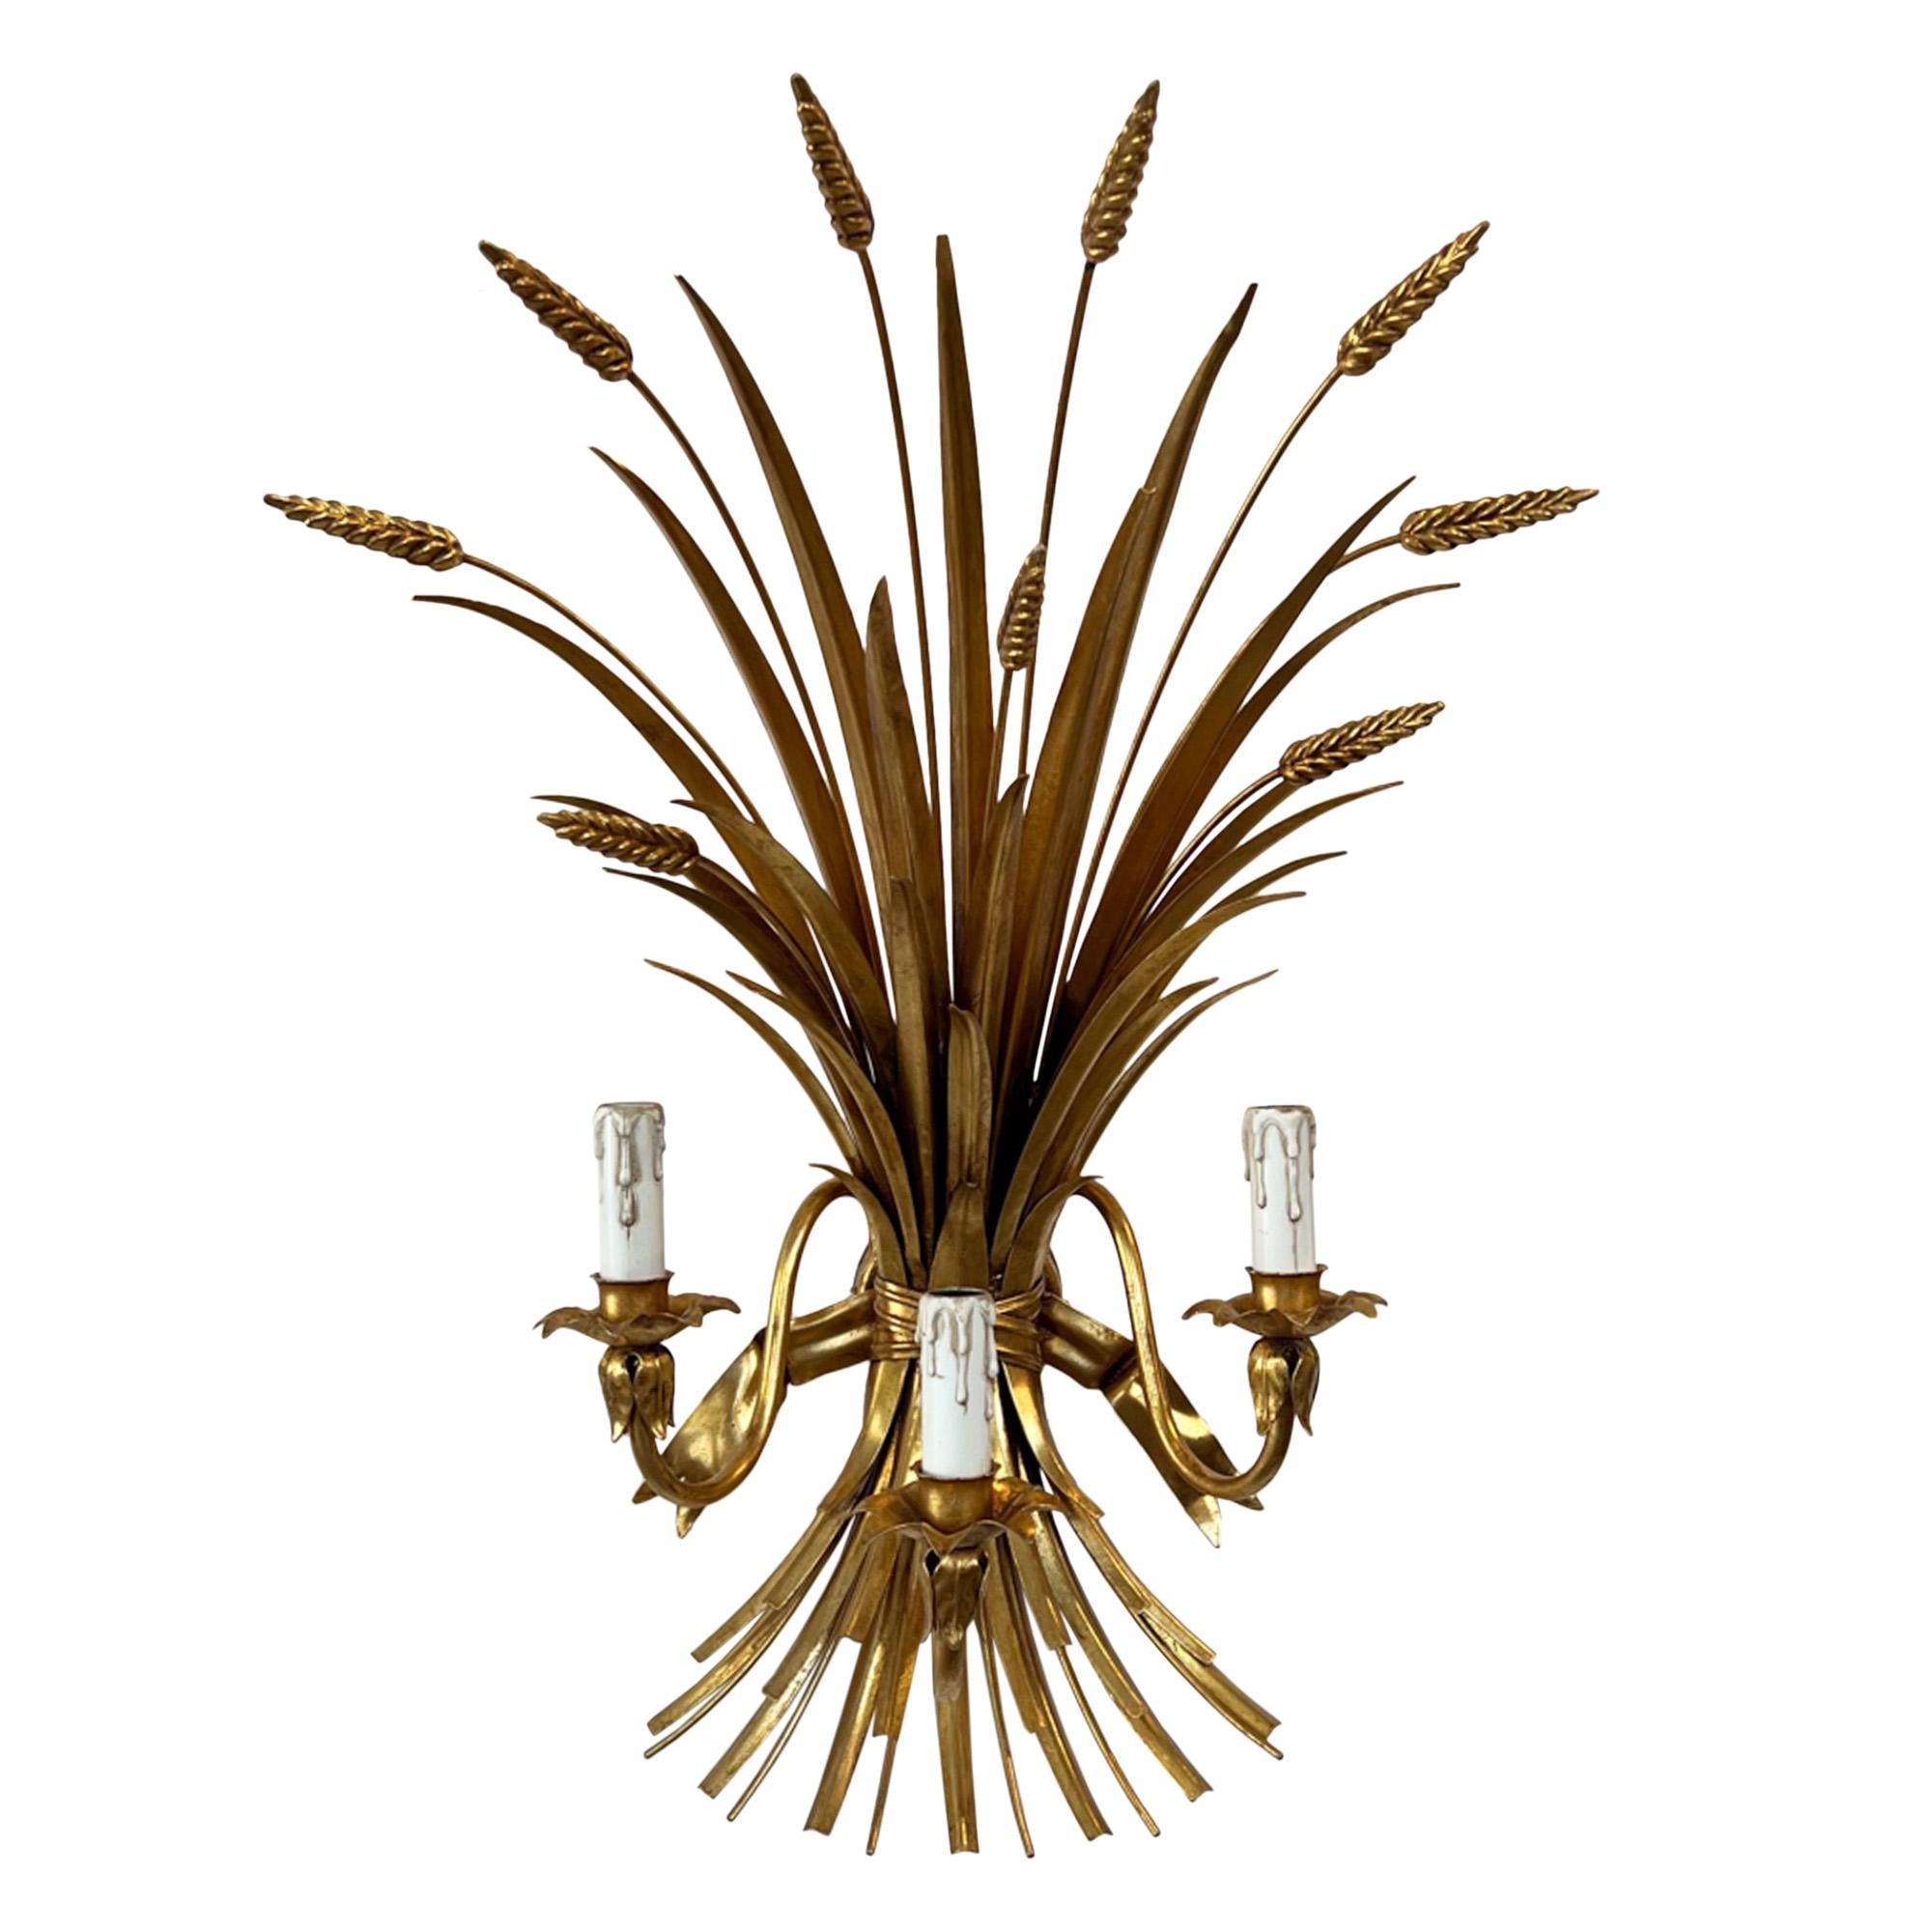 These large but intricately detailed wheat sheaf wall lights were made in Italy in the 1970s. They each have 3 lights held on strong curving arms. Crafted with expertise from gilt metal, all the leaves, ears of corn and rope ties are brilliantly